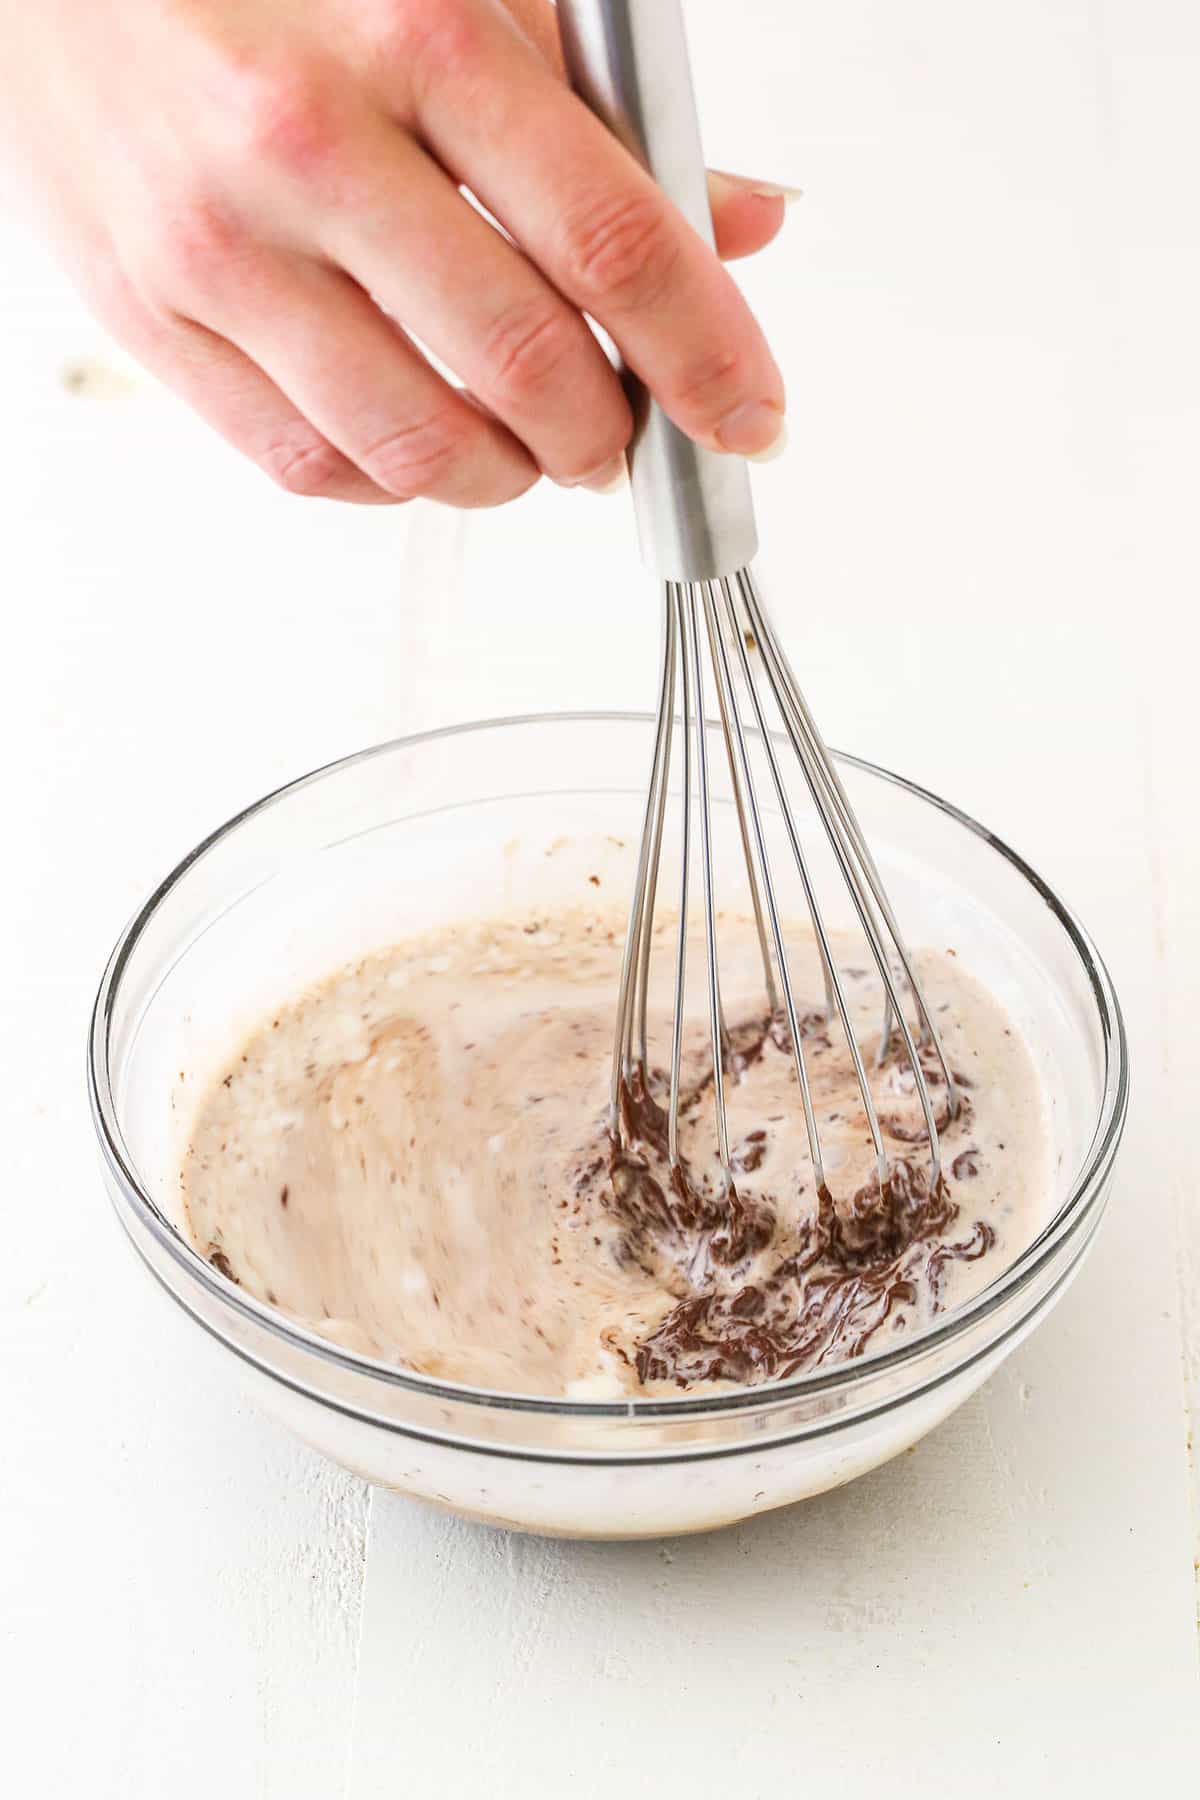 Whisking heavy whipping cream poured over chocolate chips in a glass bowl